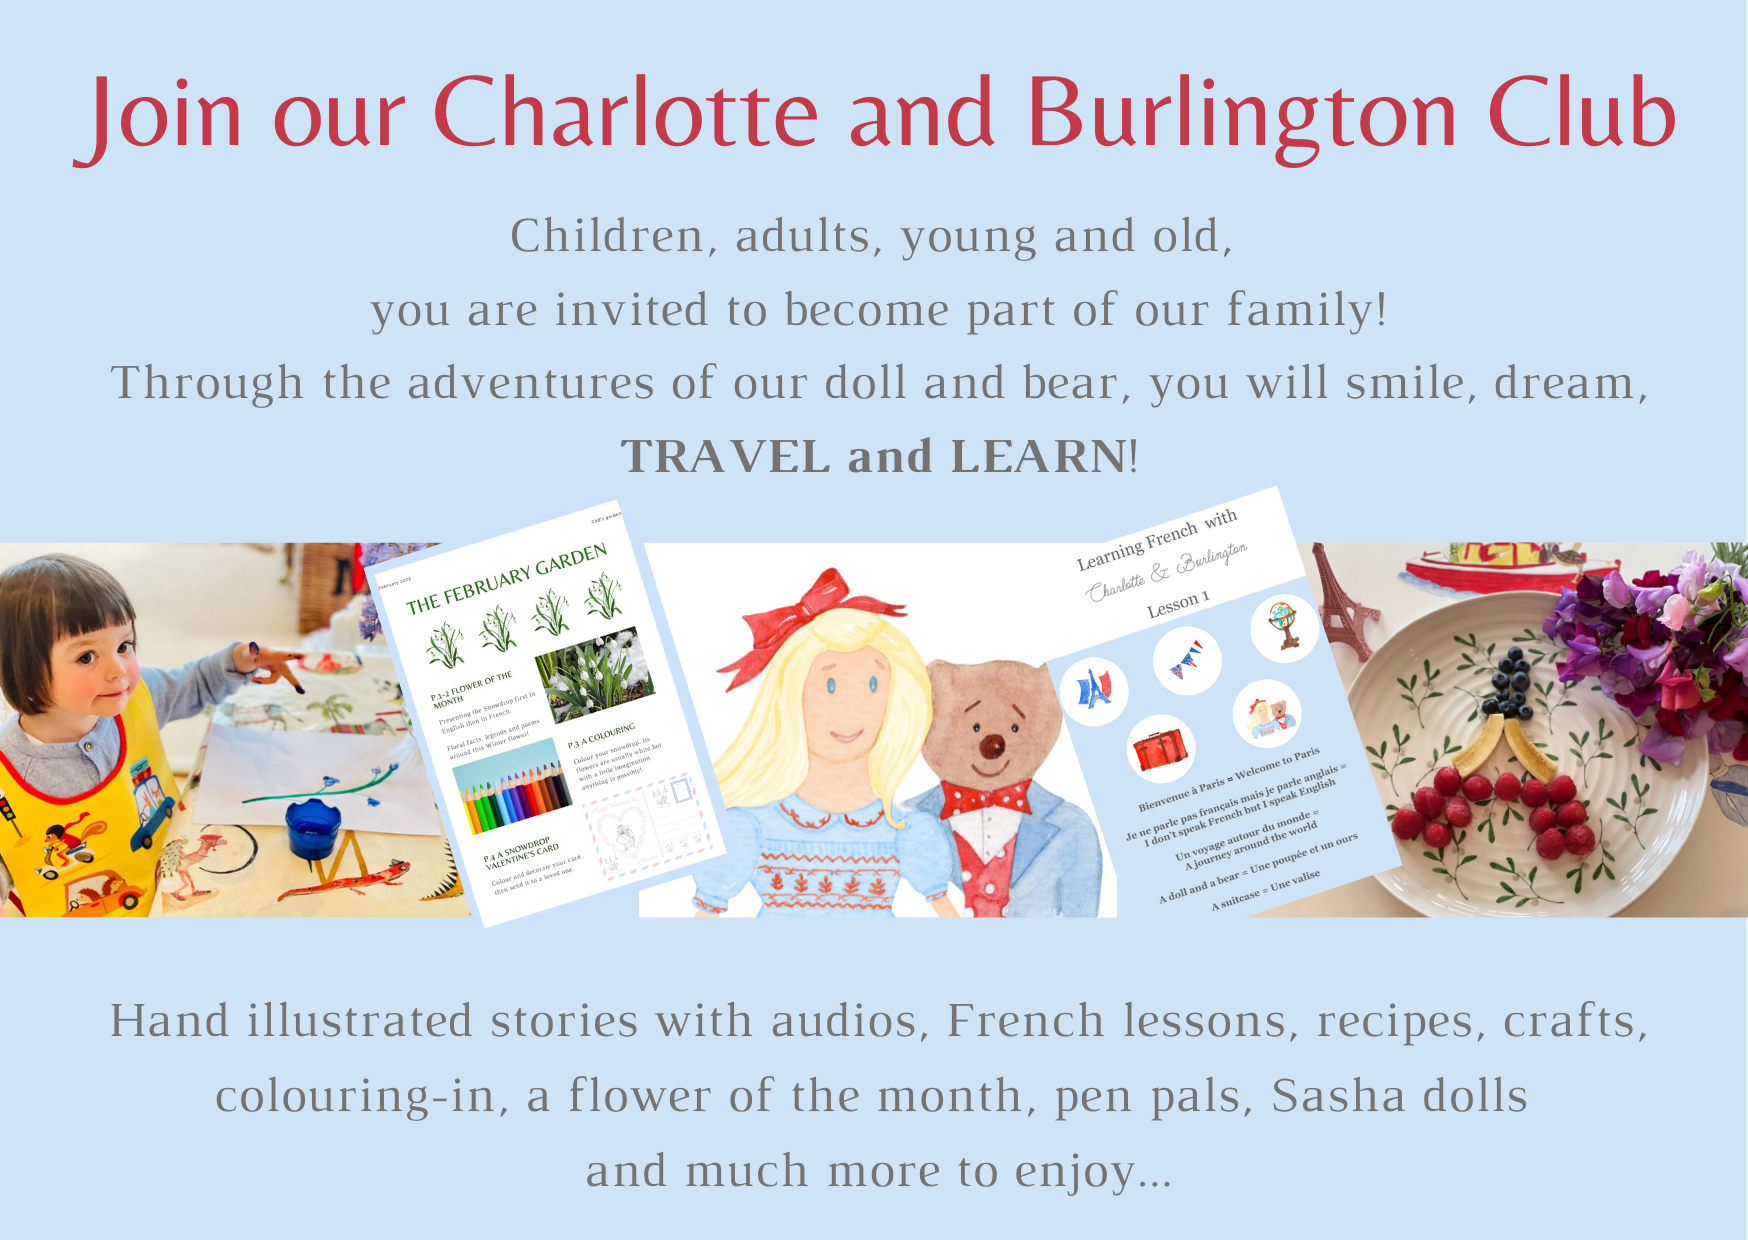 Charlotte and Burlington family club learn French